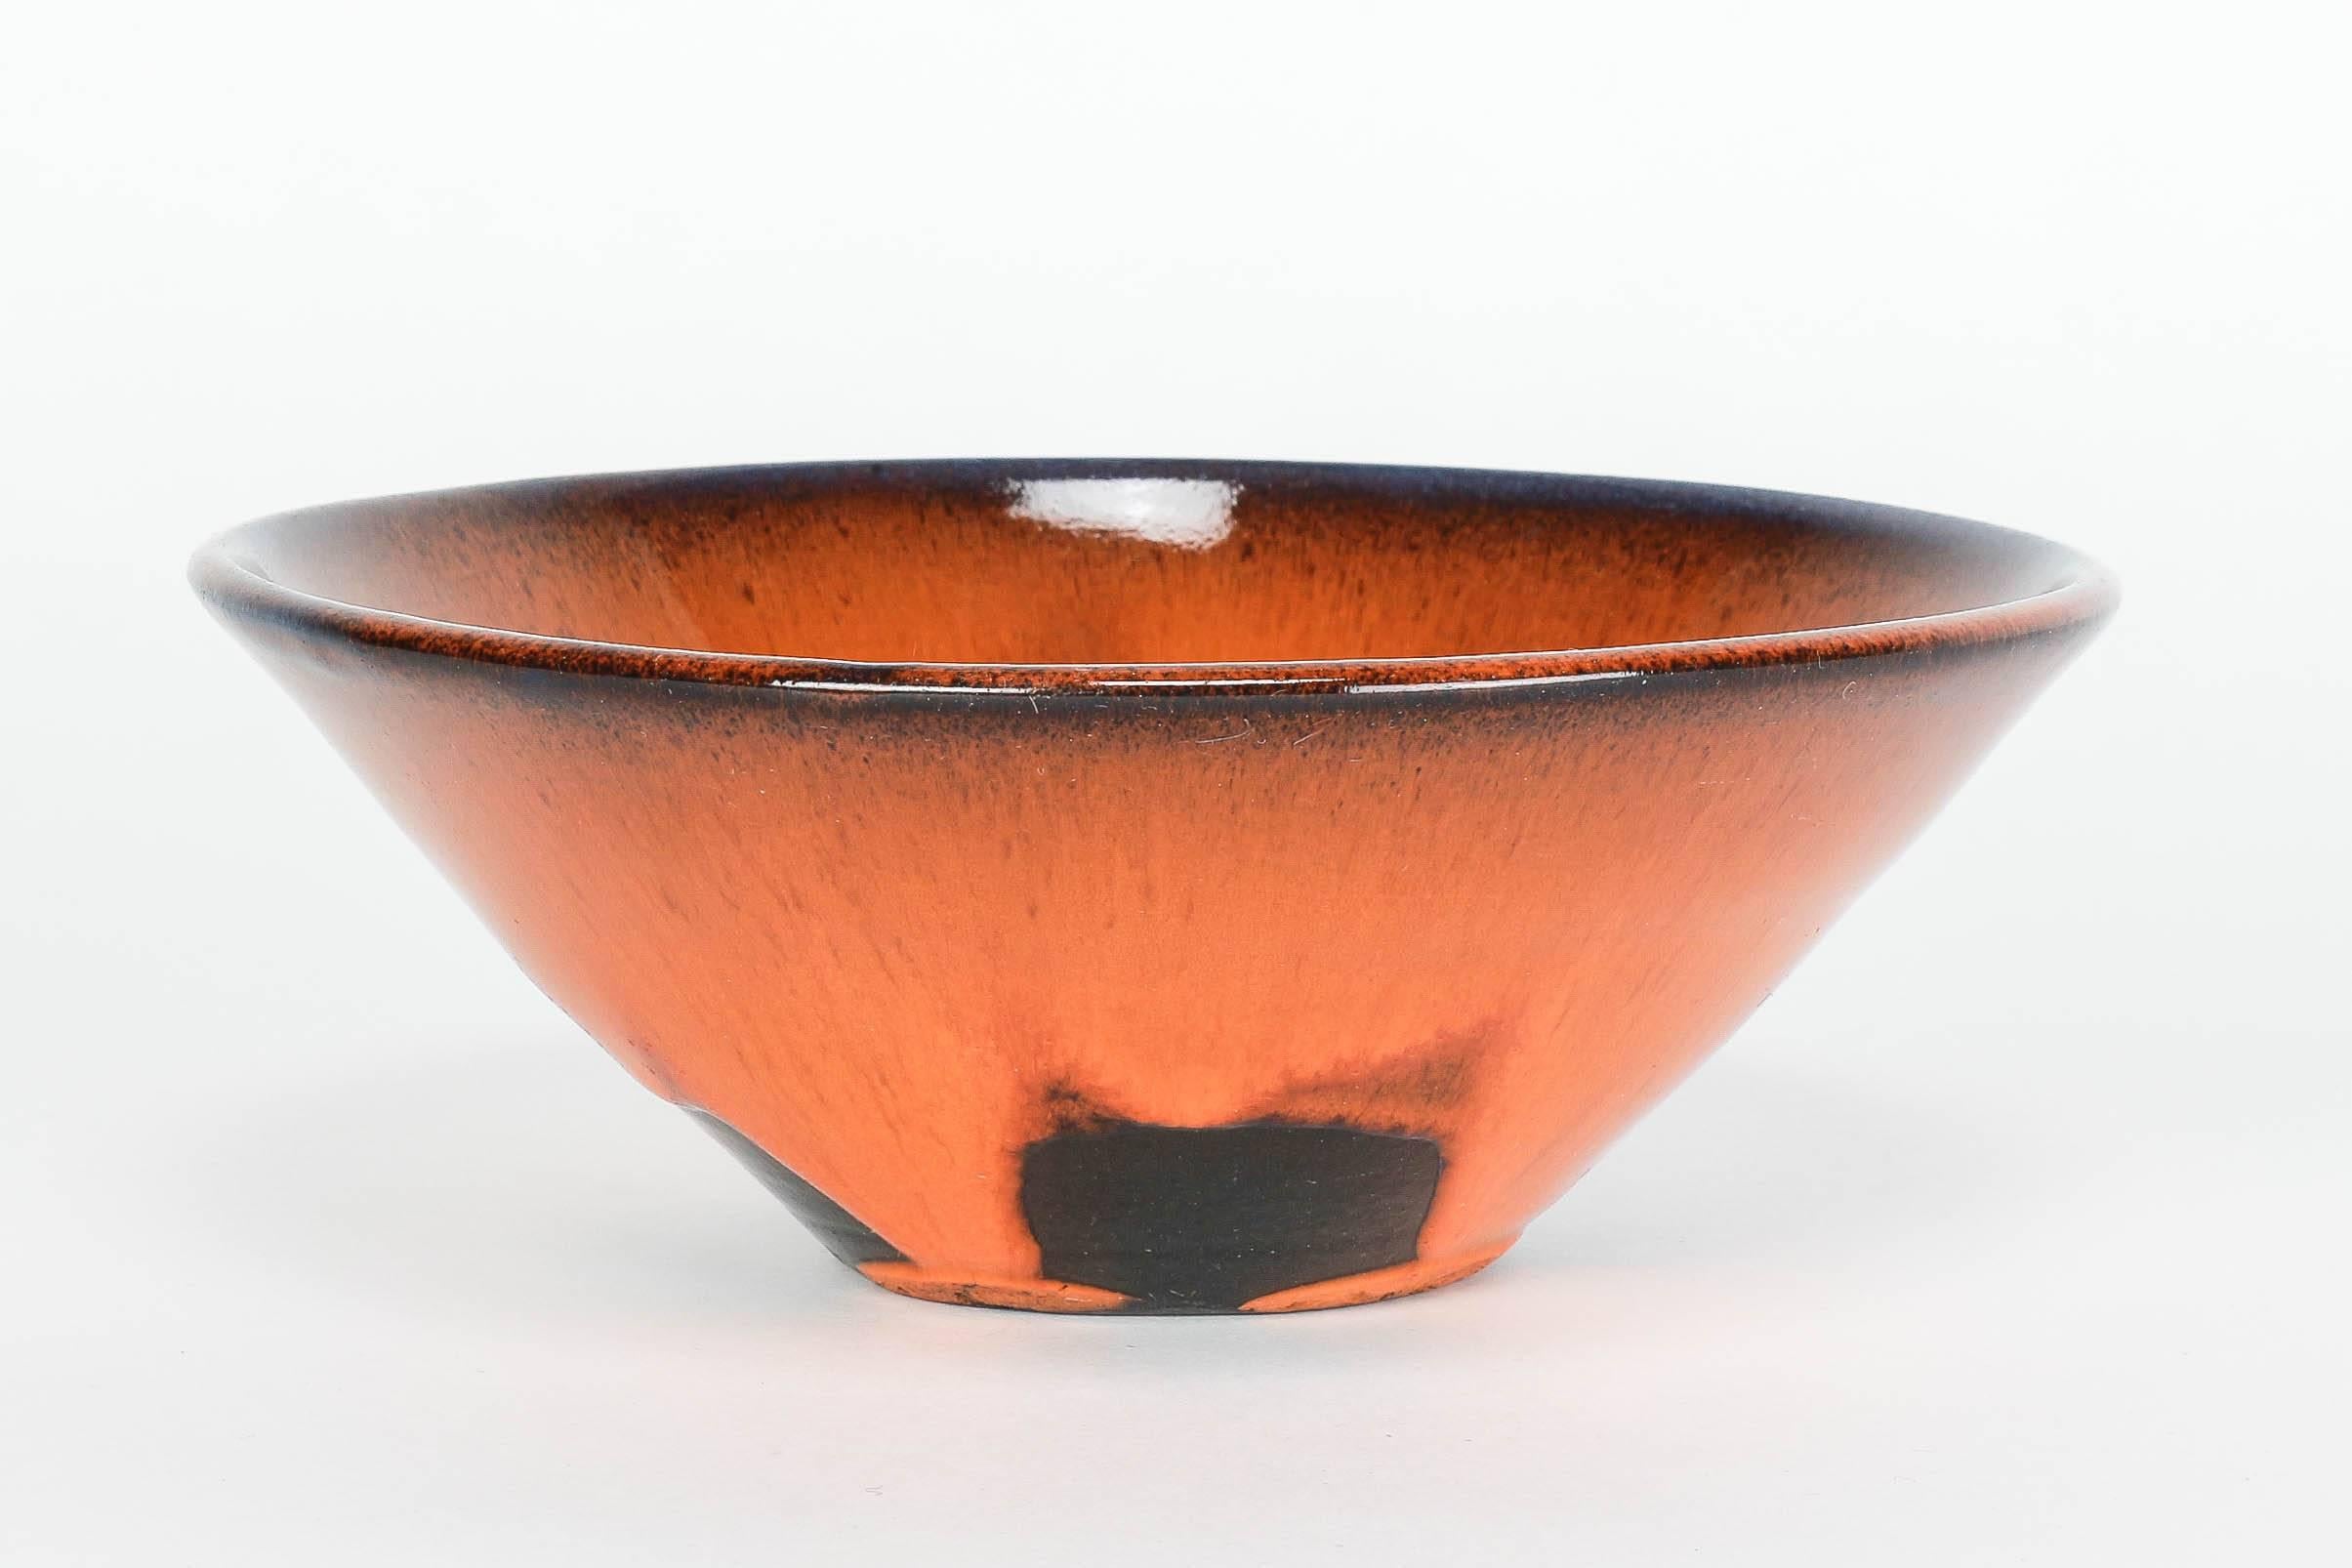 Beautiful Swiss pottery bowl in orange and black colors with a dash of blue on the rim. Signed to bottom with “RE”.